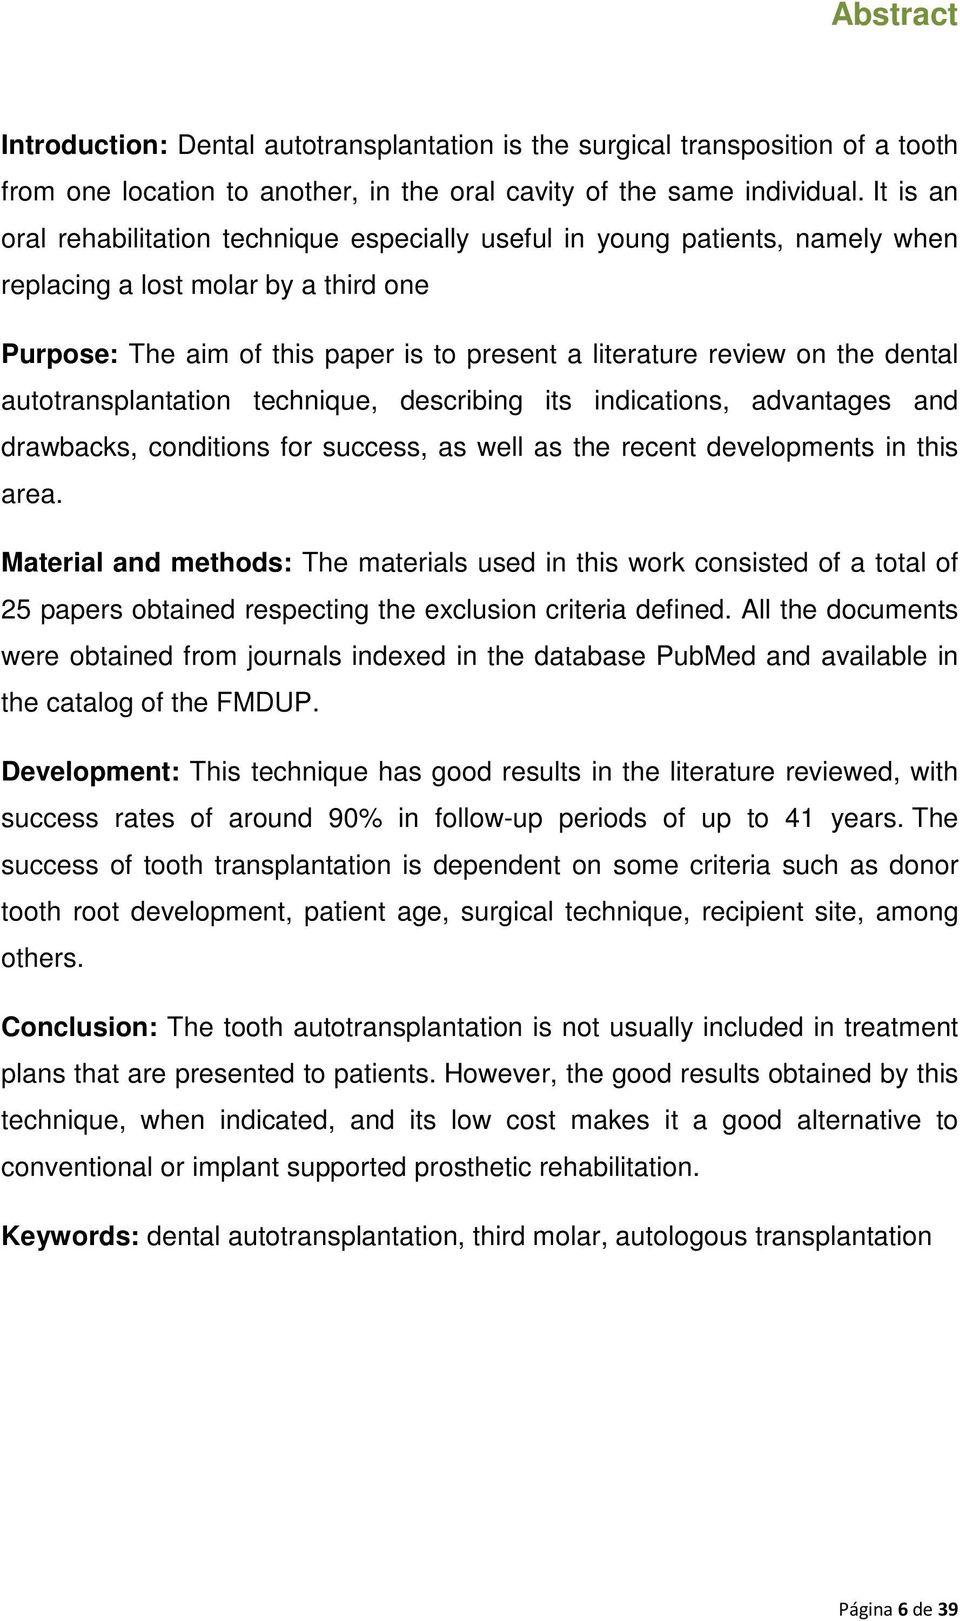 dental autotransplantation technique, describing its indications, advantages and drawbacks, conditions for success, as well as the recent developments in this area.